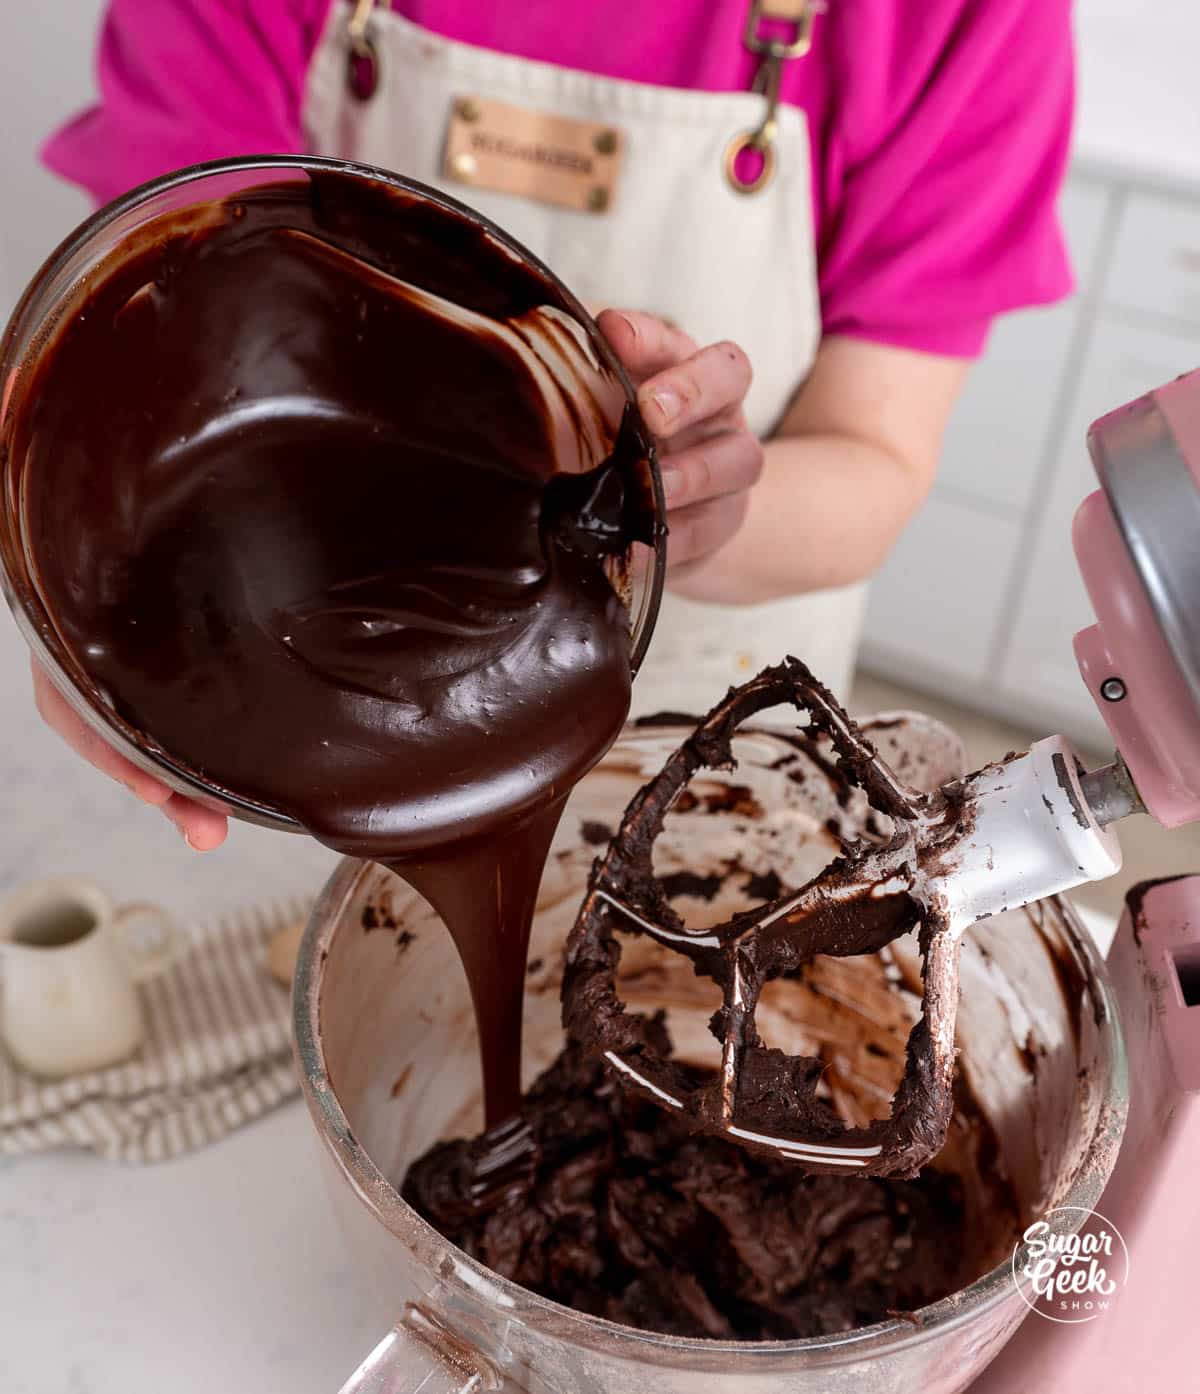 pouring a bowl of chocolate to a bowl of frosting